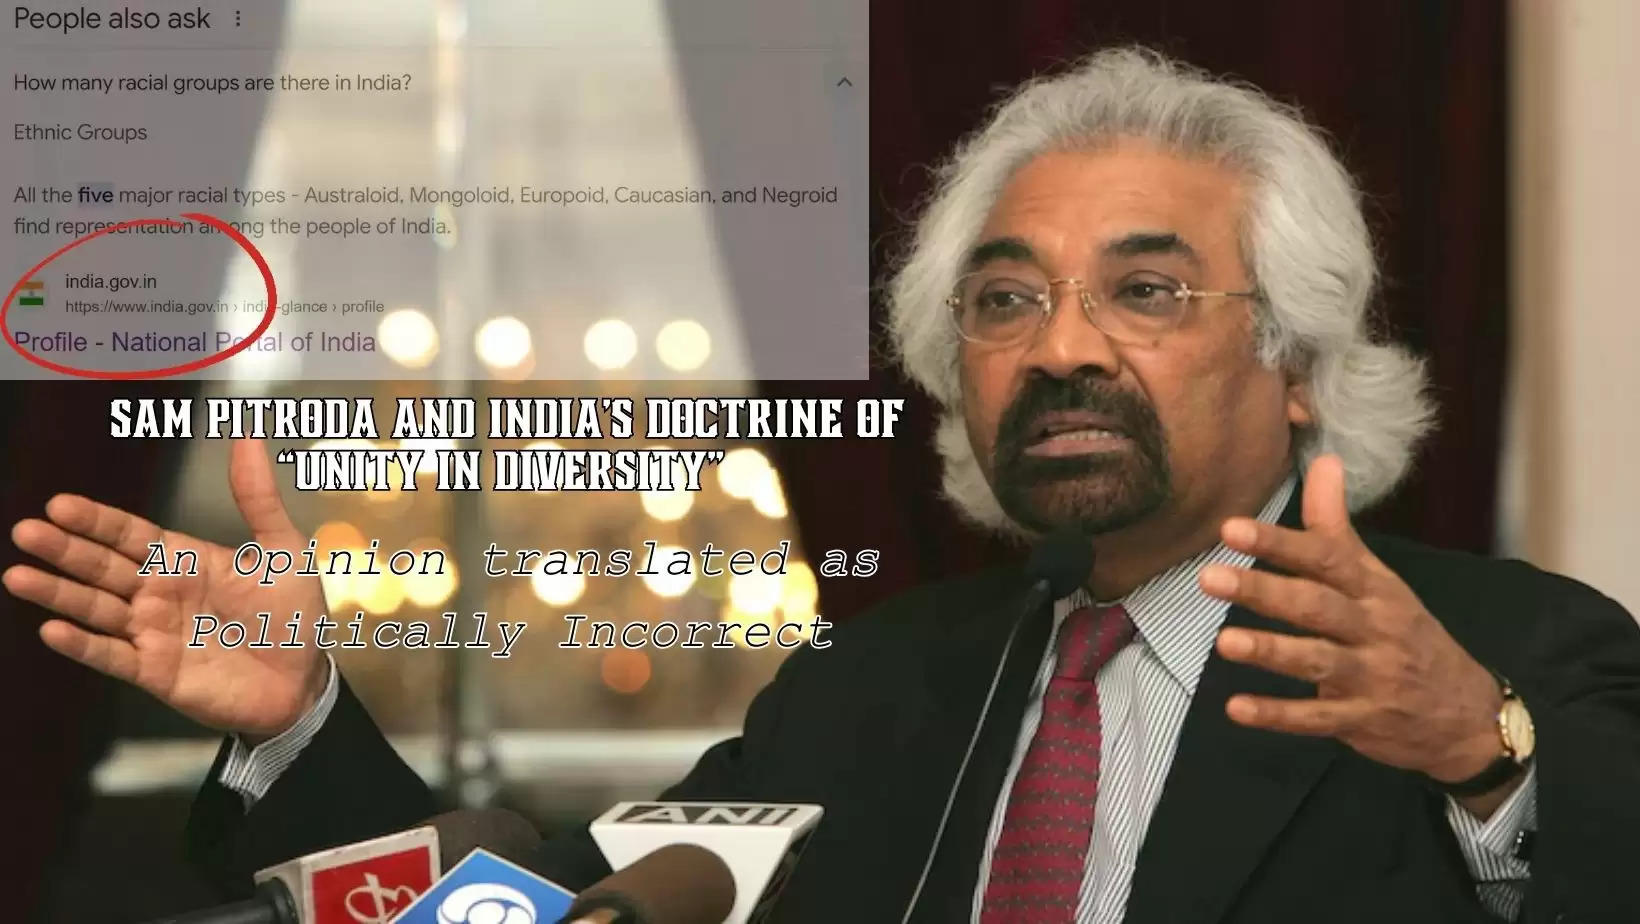 Sam Pitroda and India's Doctrine of Unity in Diversity: An Opinion translated as Politically Incorrect